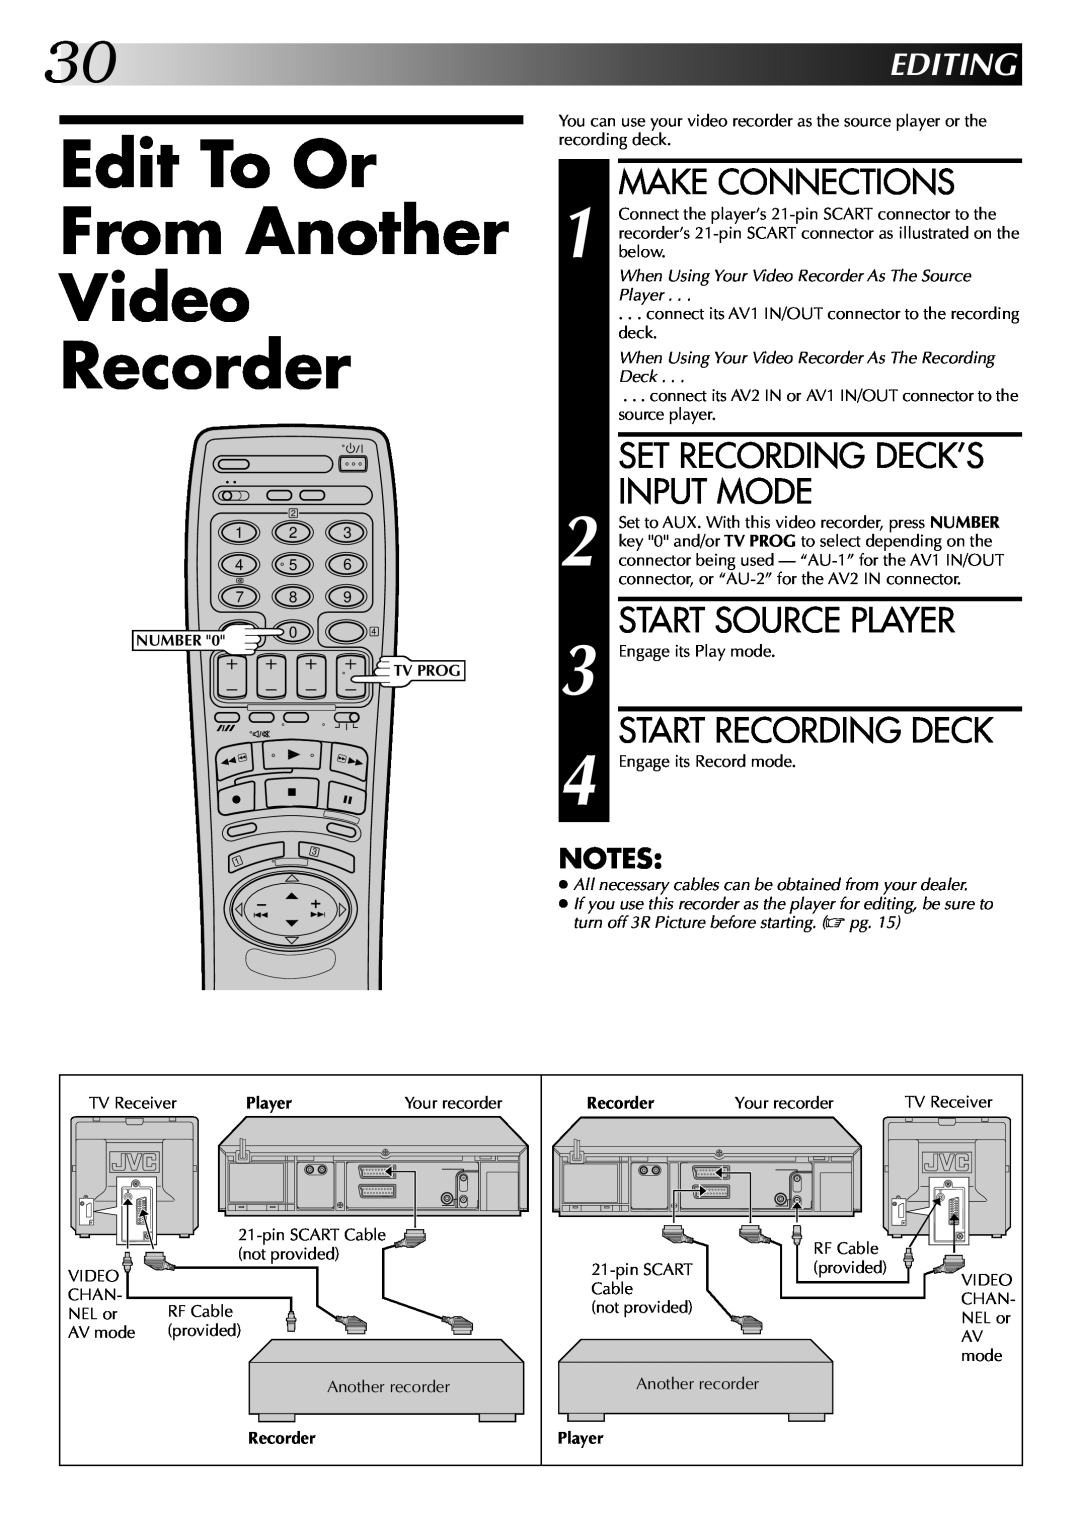 JVC HR-DD845EK Edit To Or From Another Video Recorder, Make Connections, Set Recording Deck’S Input Mode, Editing, Player 